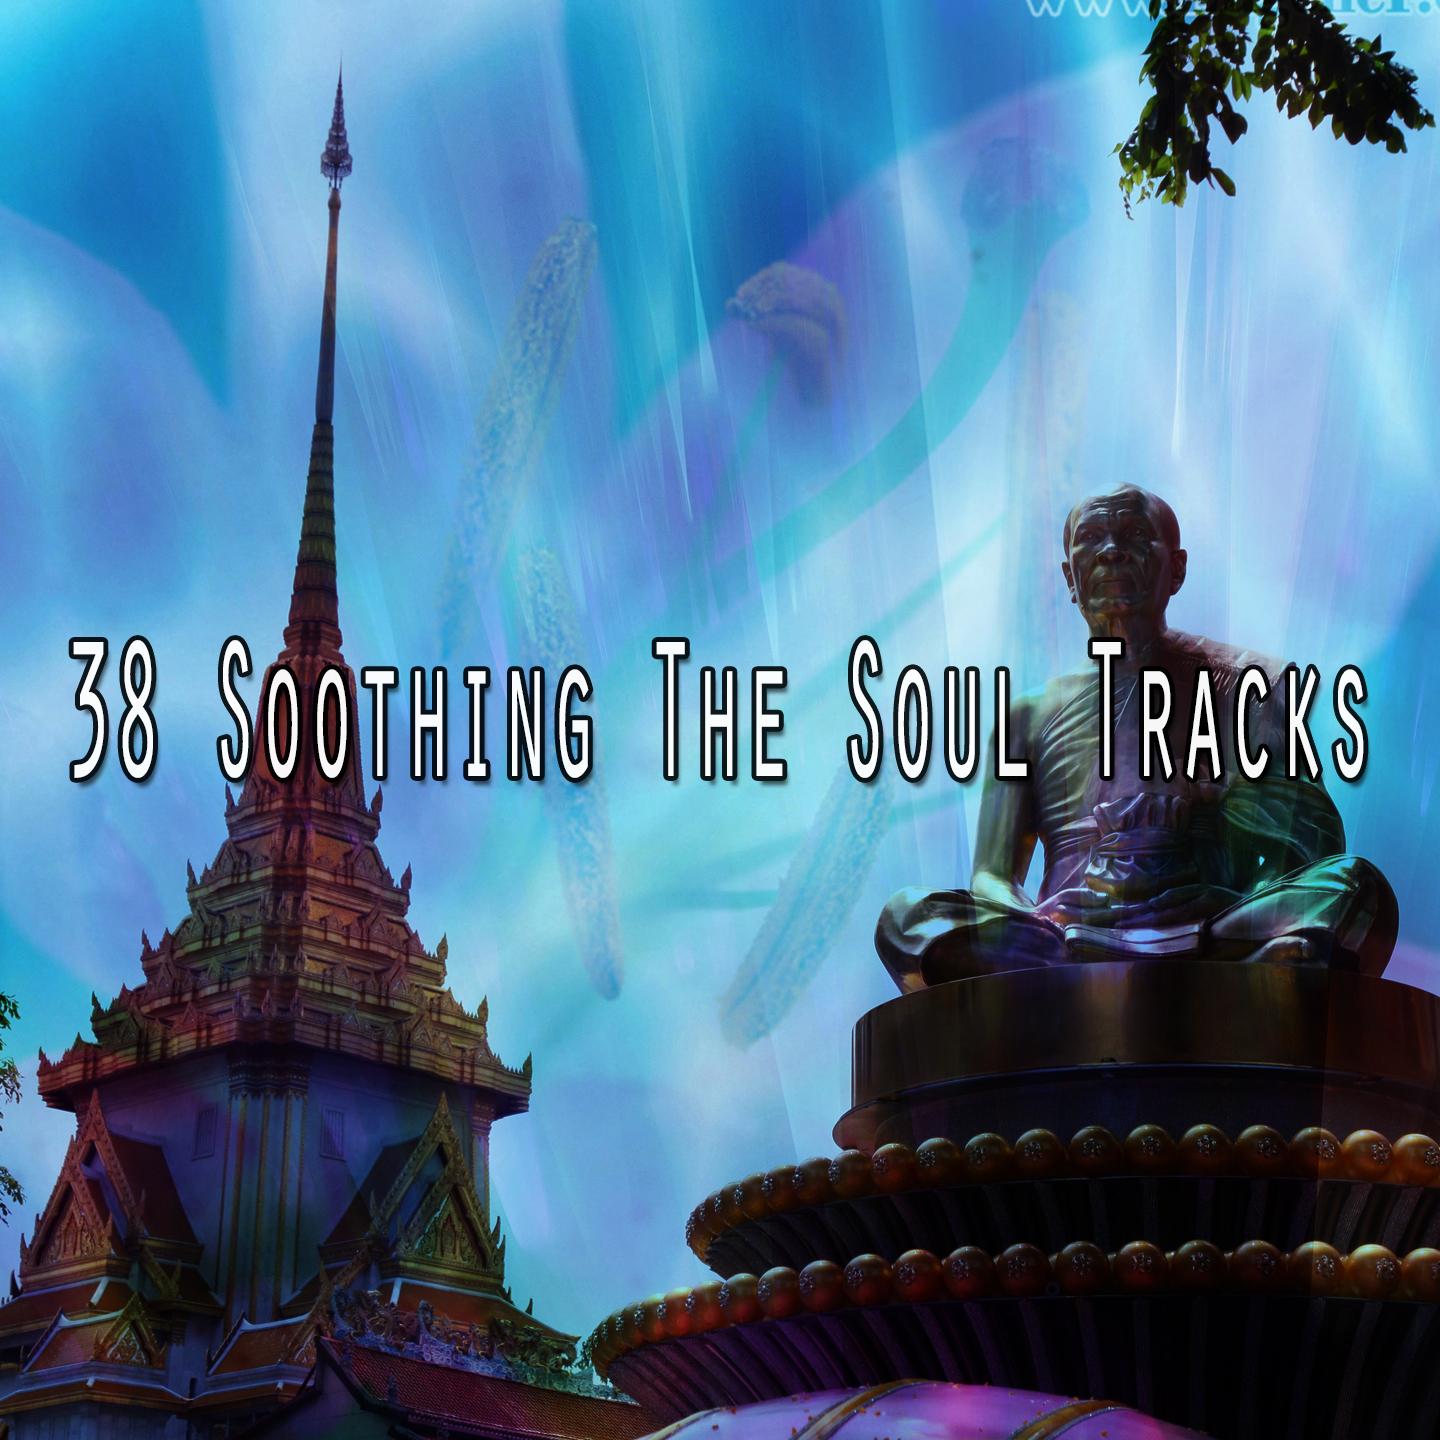 38 Soothing The Soul Tracks